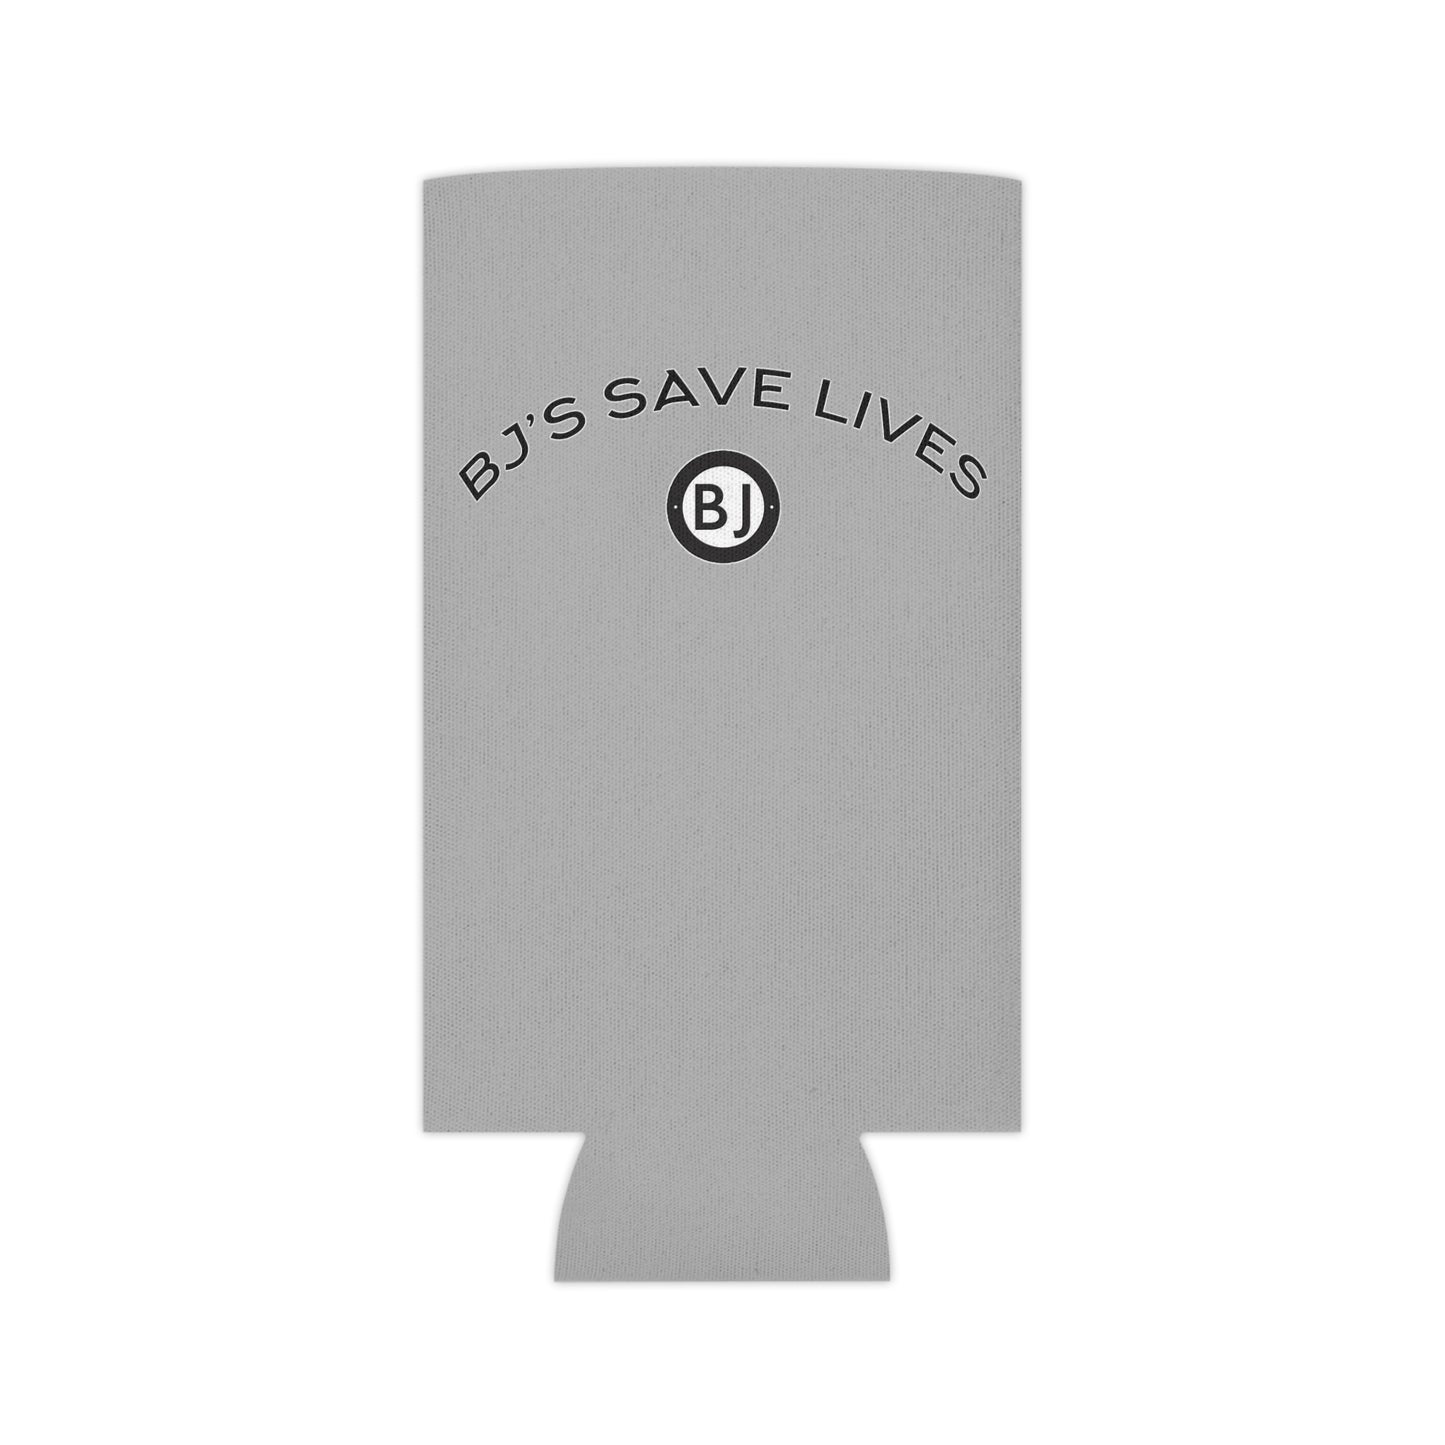 "BJ'S SAVE LIVES" Can Cooler